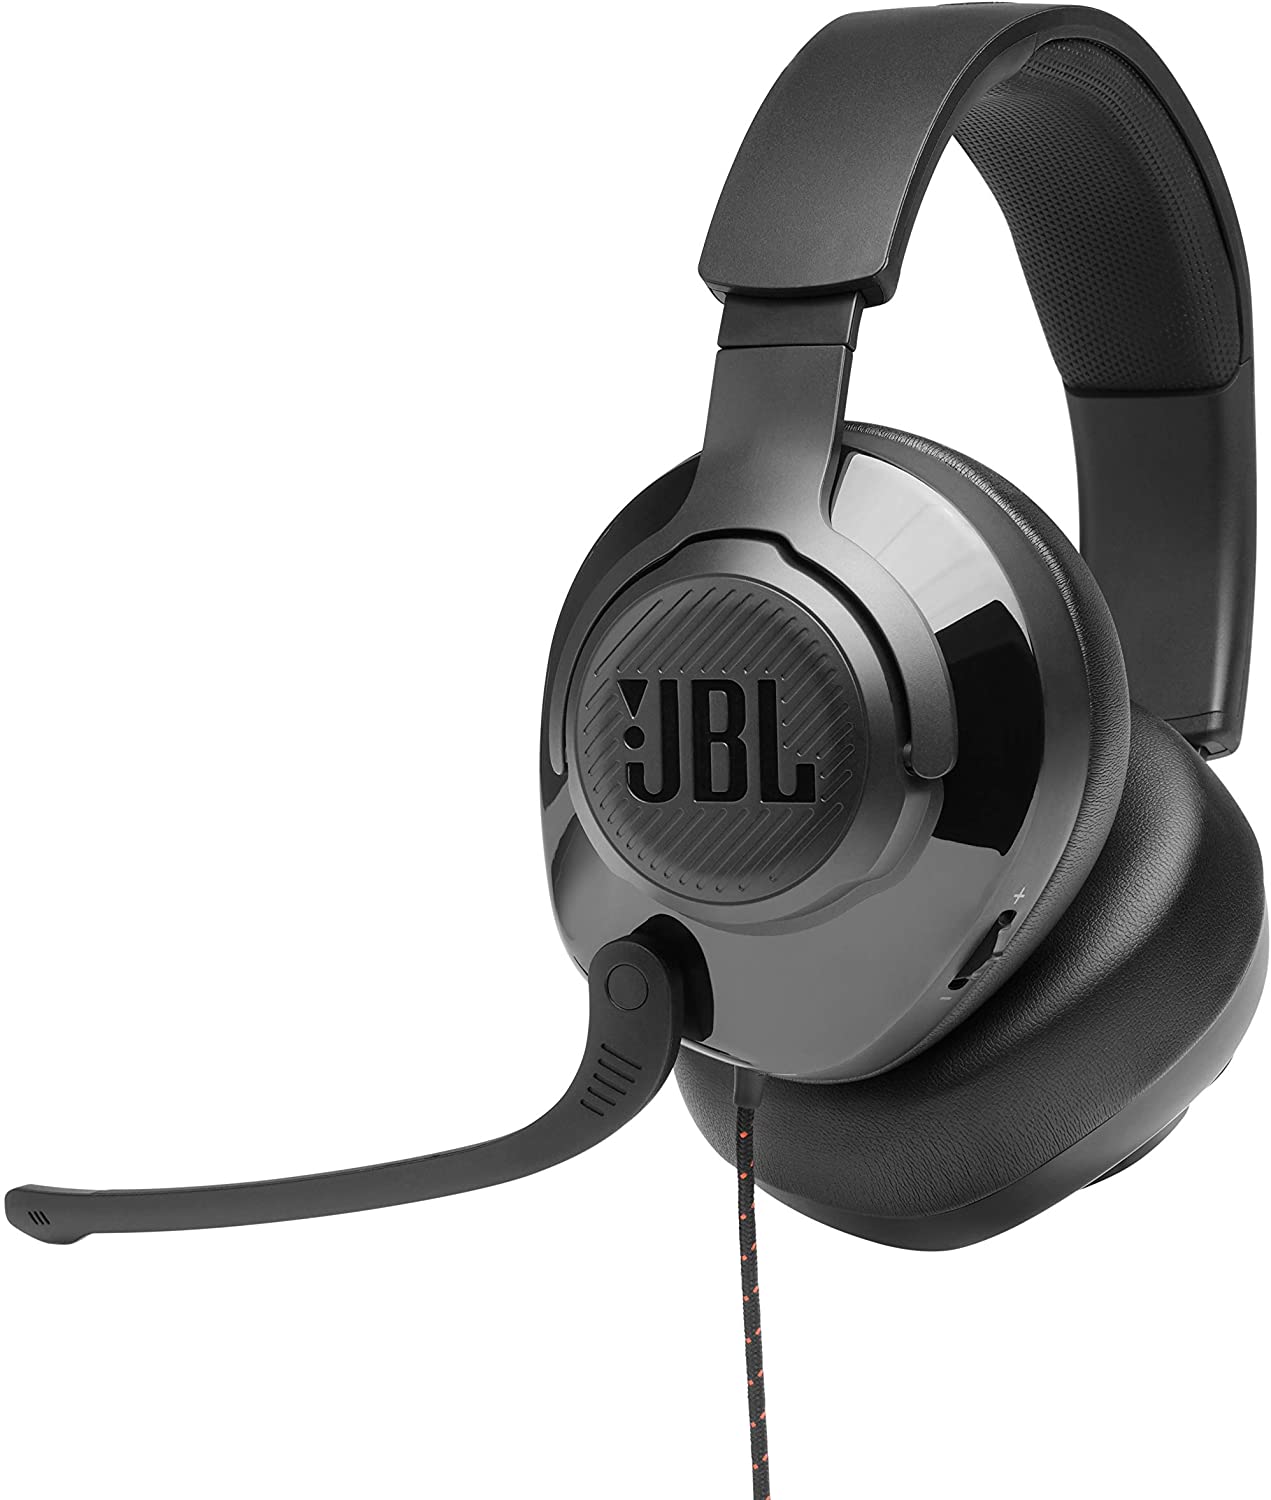 JBL Quantum 300 - Wired Over-Ear Gaming Headphones with JBL Quantum Engine Software